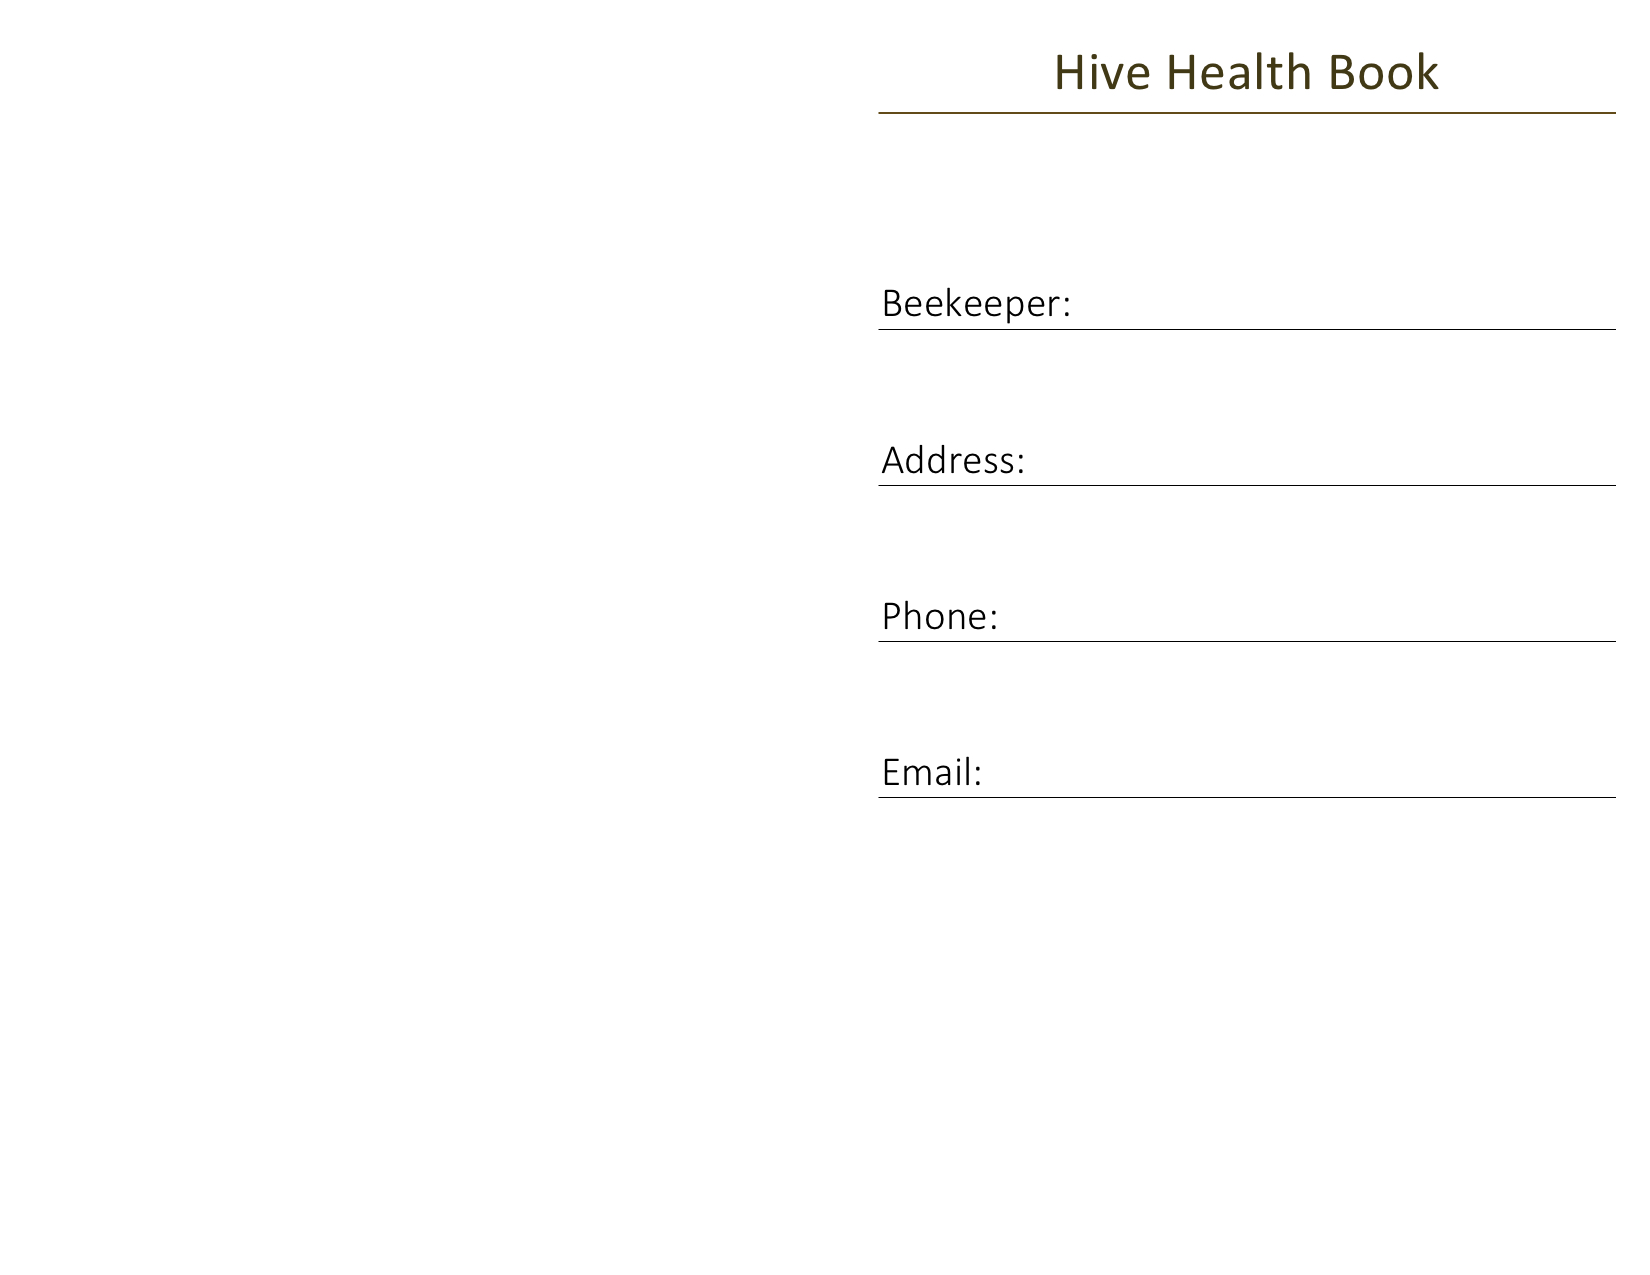 Text reads Hive Health Book and has spaces below to fill in beekeeper, address, phone, email